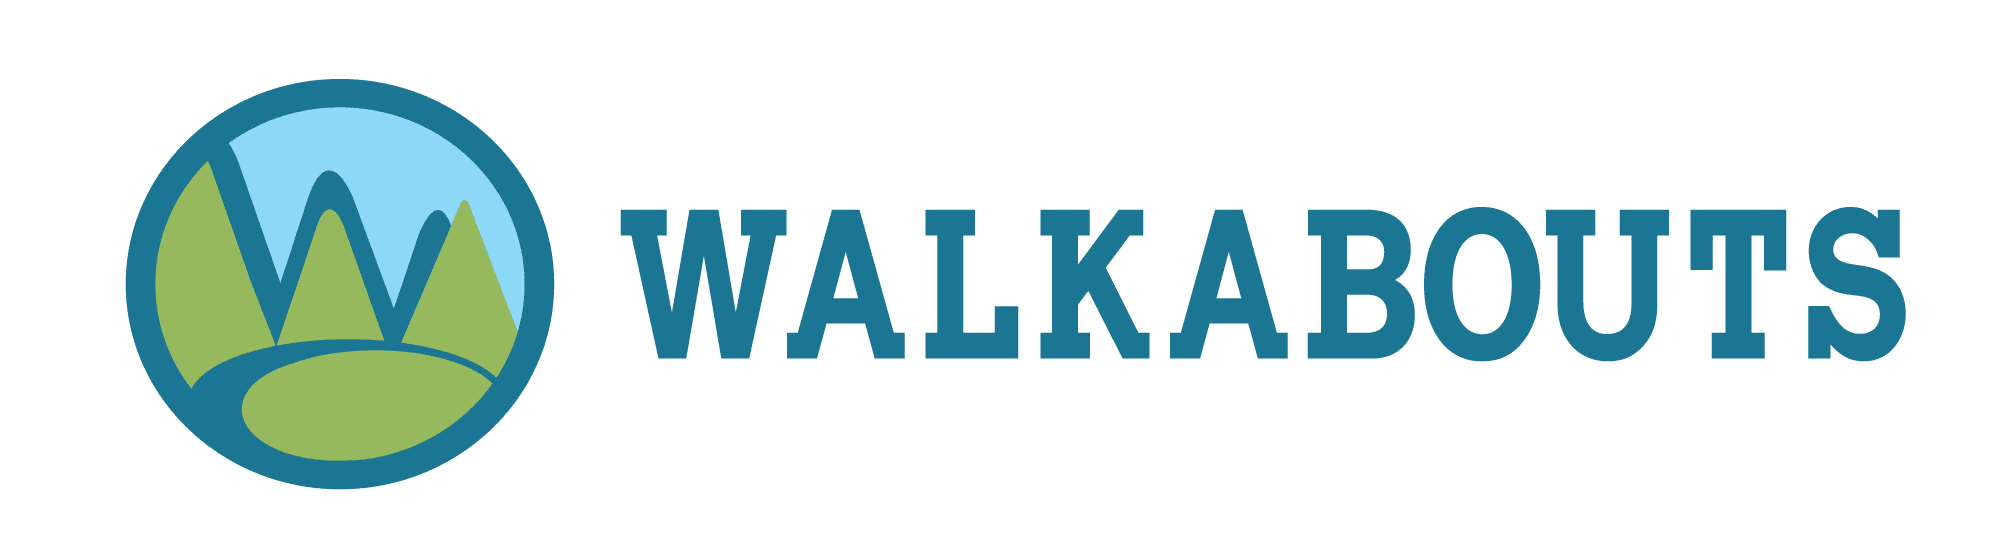 ActivEd/Walkabouts